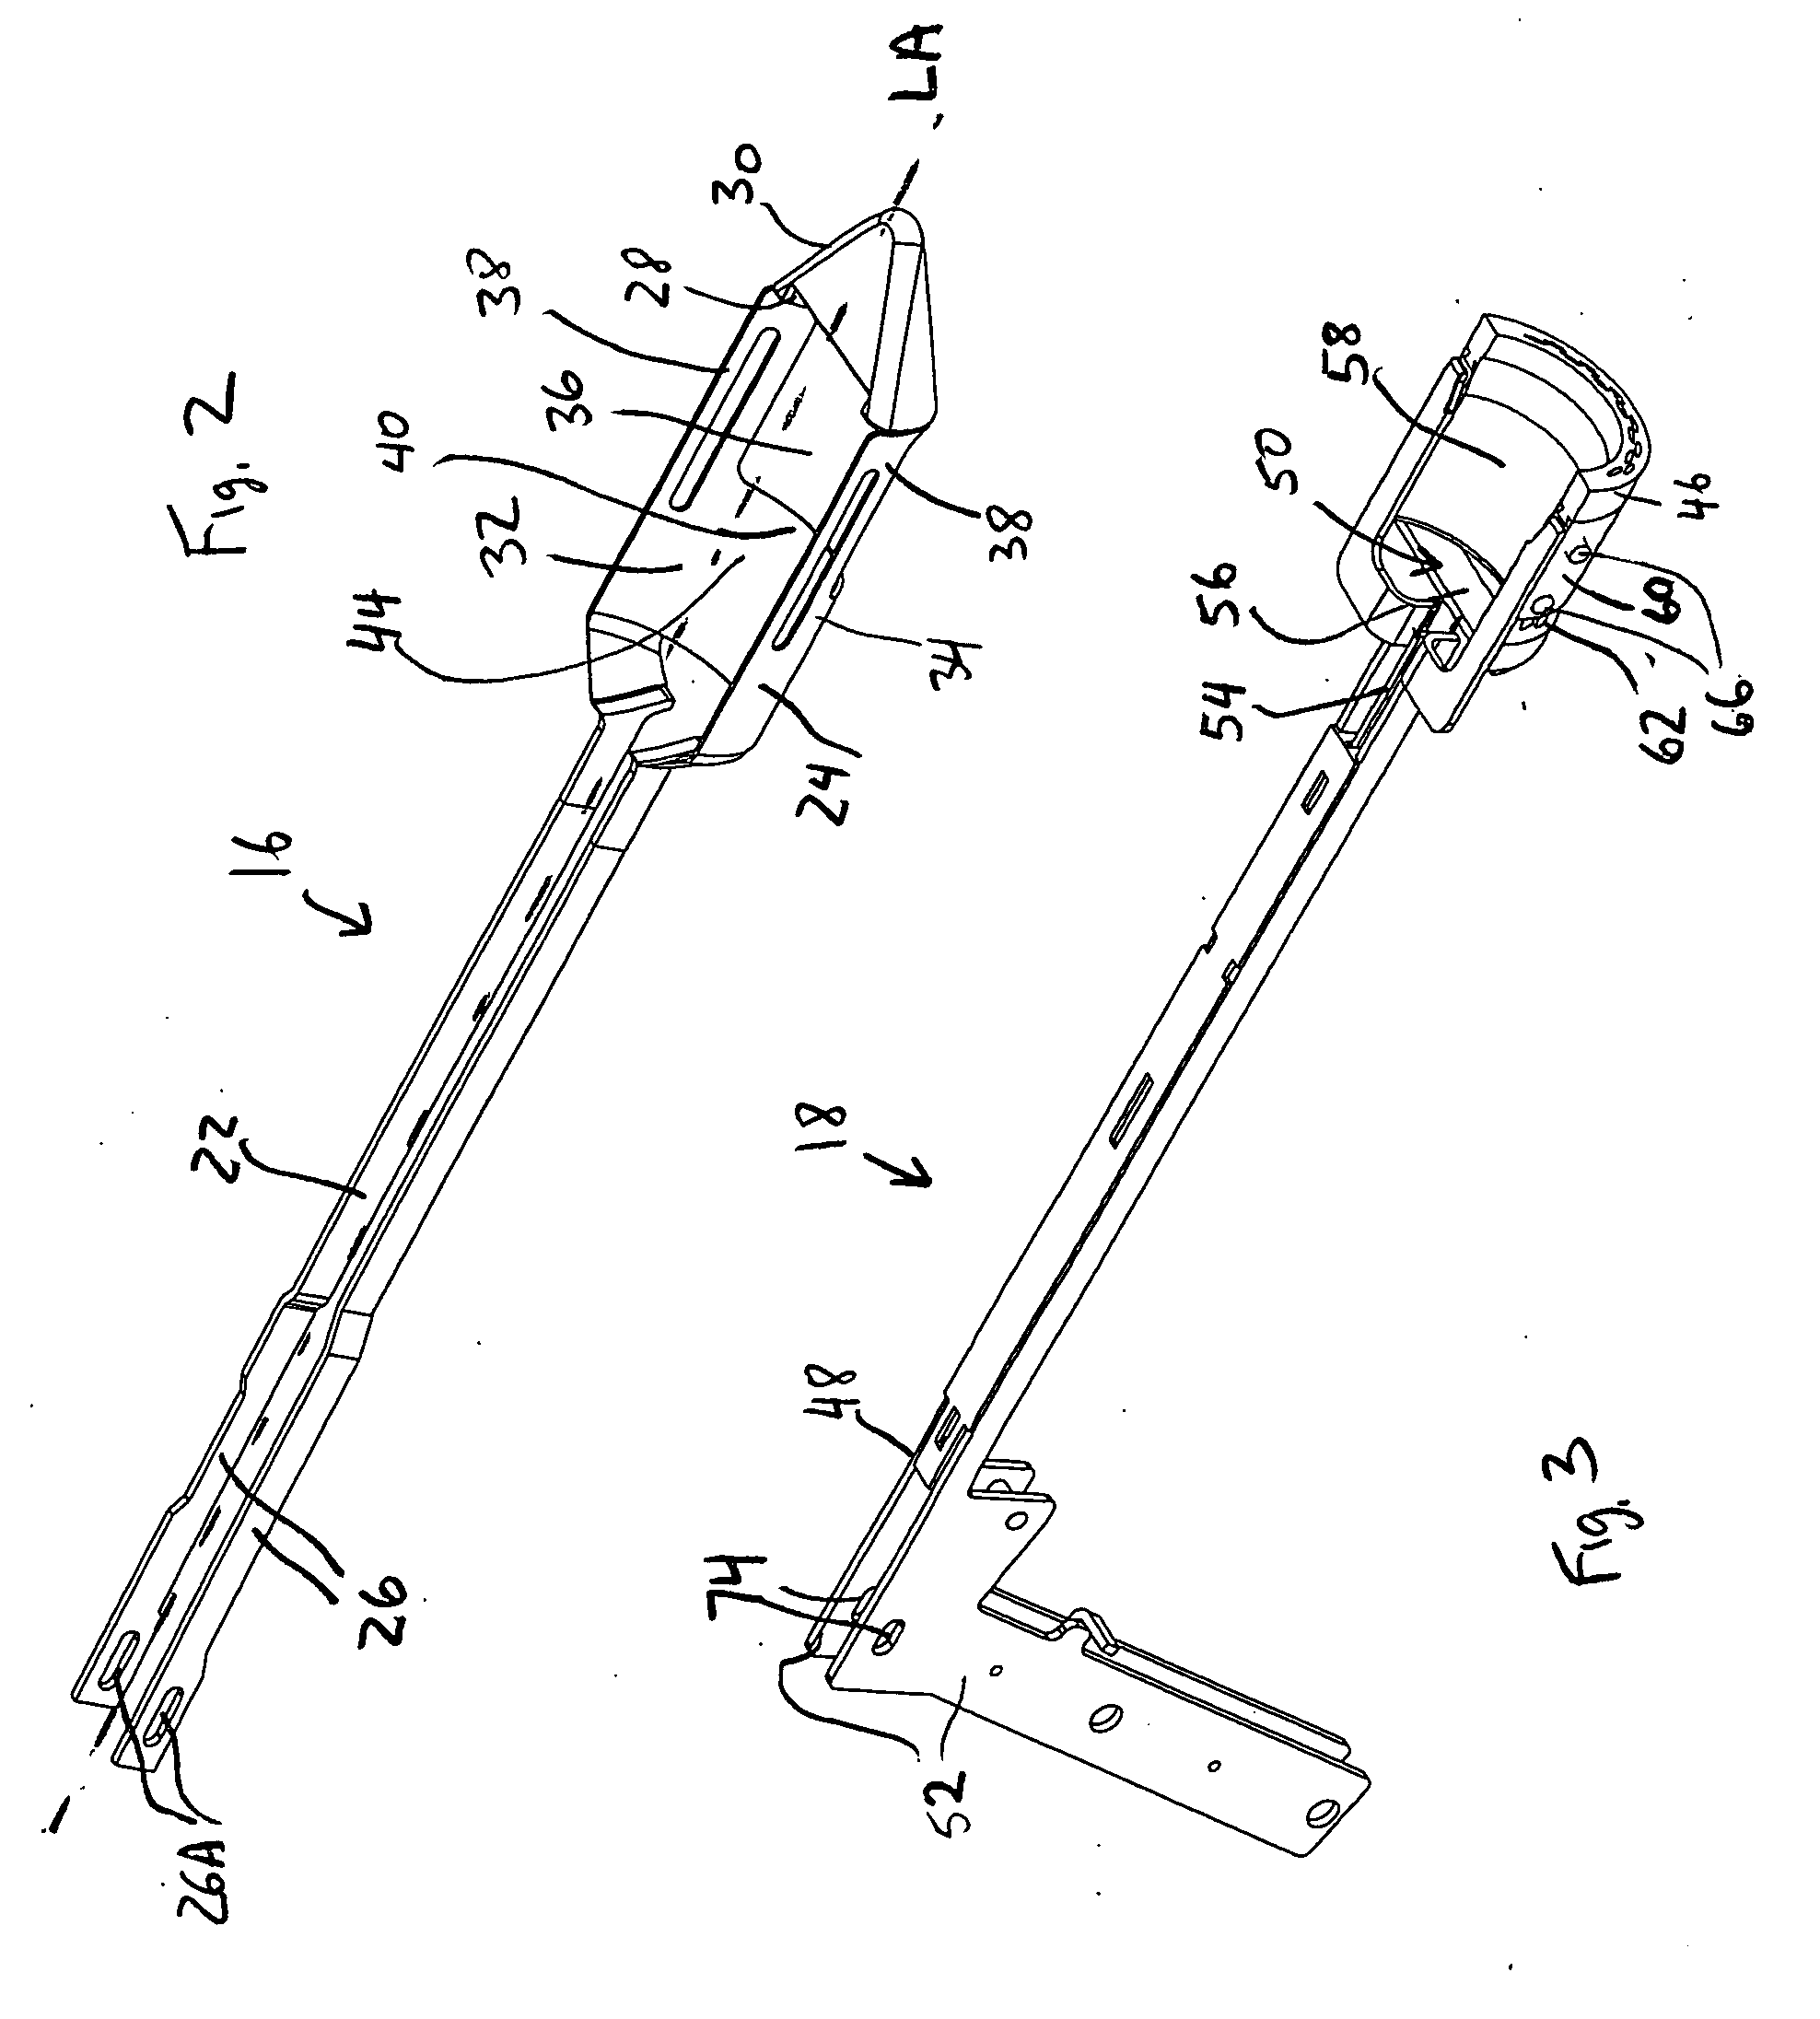 Surgical stapling instrument and method for its use